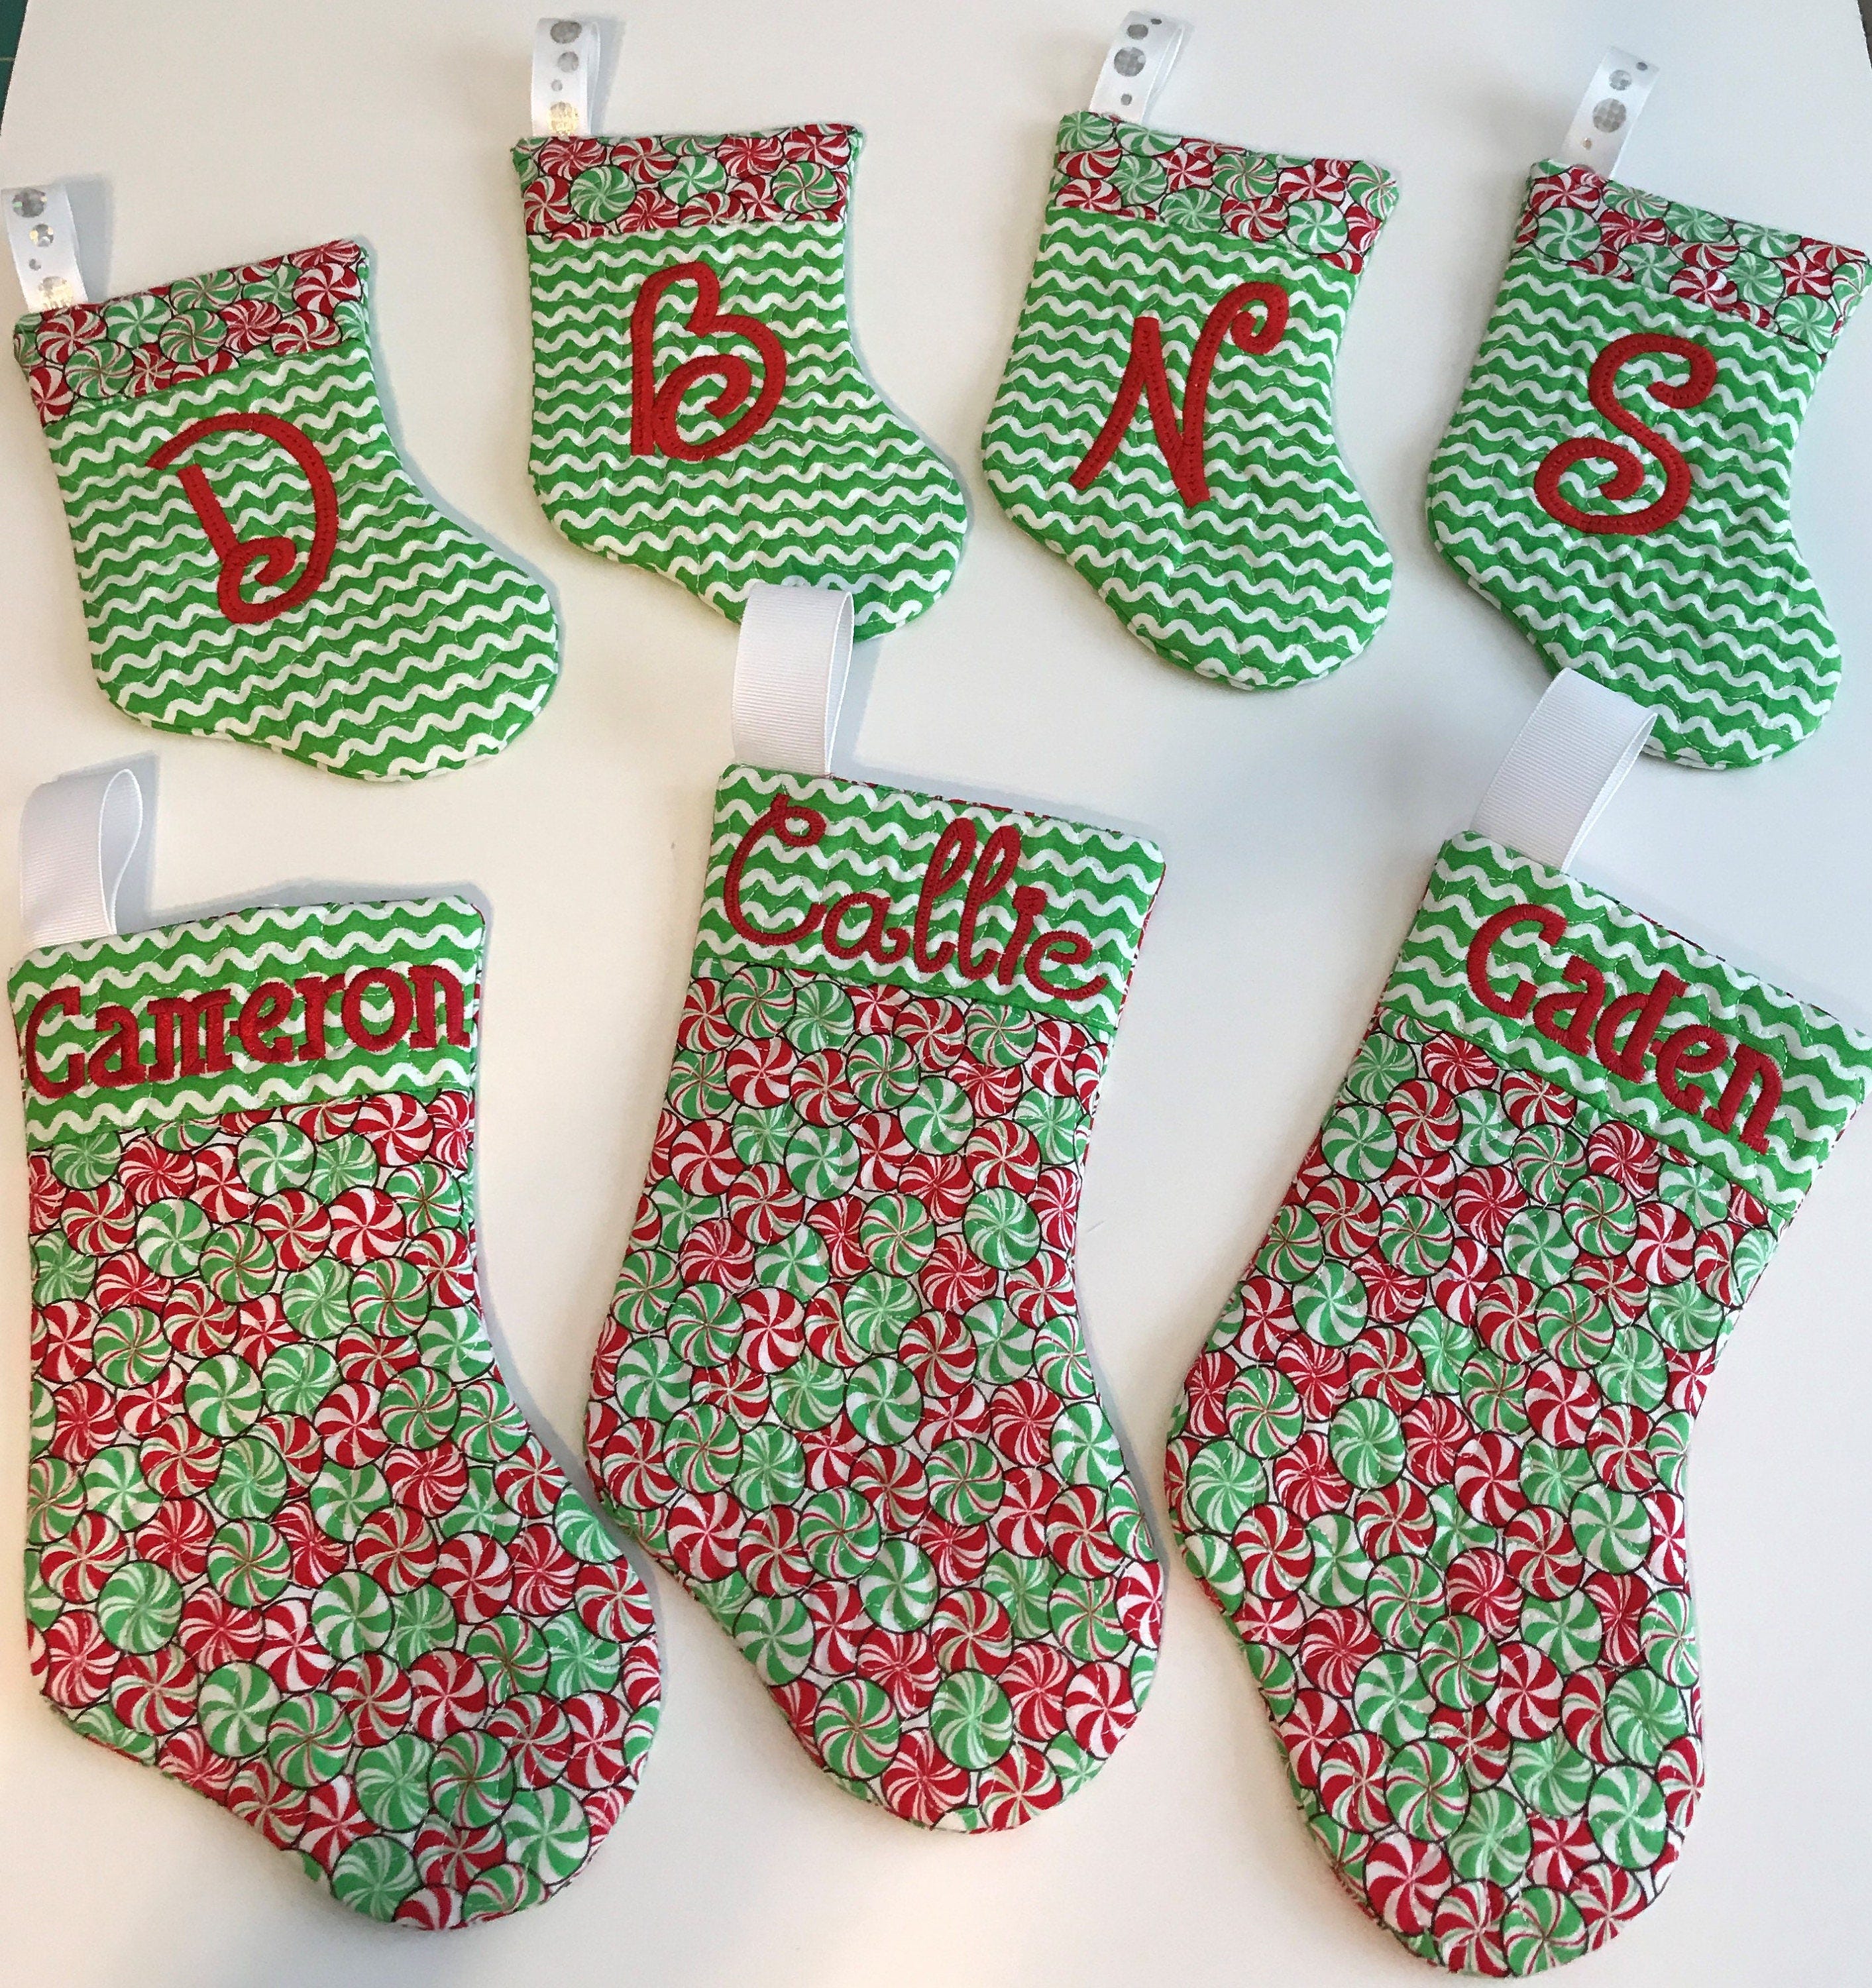 ITH In the Hoop Christmas Stocking Machine Embroidery Design File Digital Download 5 Sizes